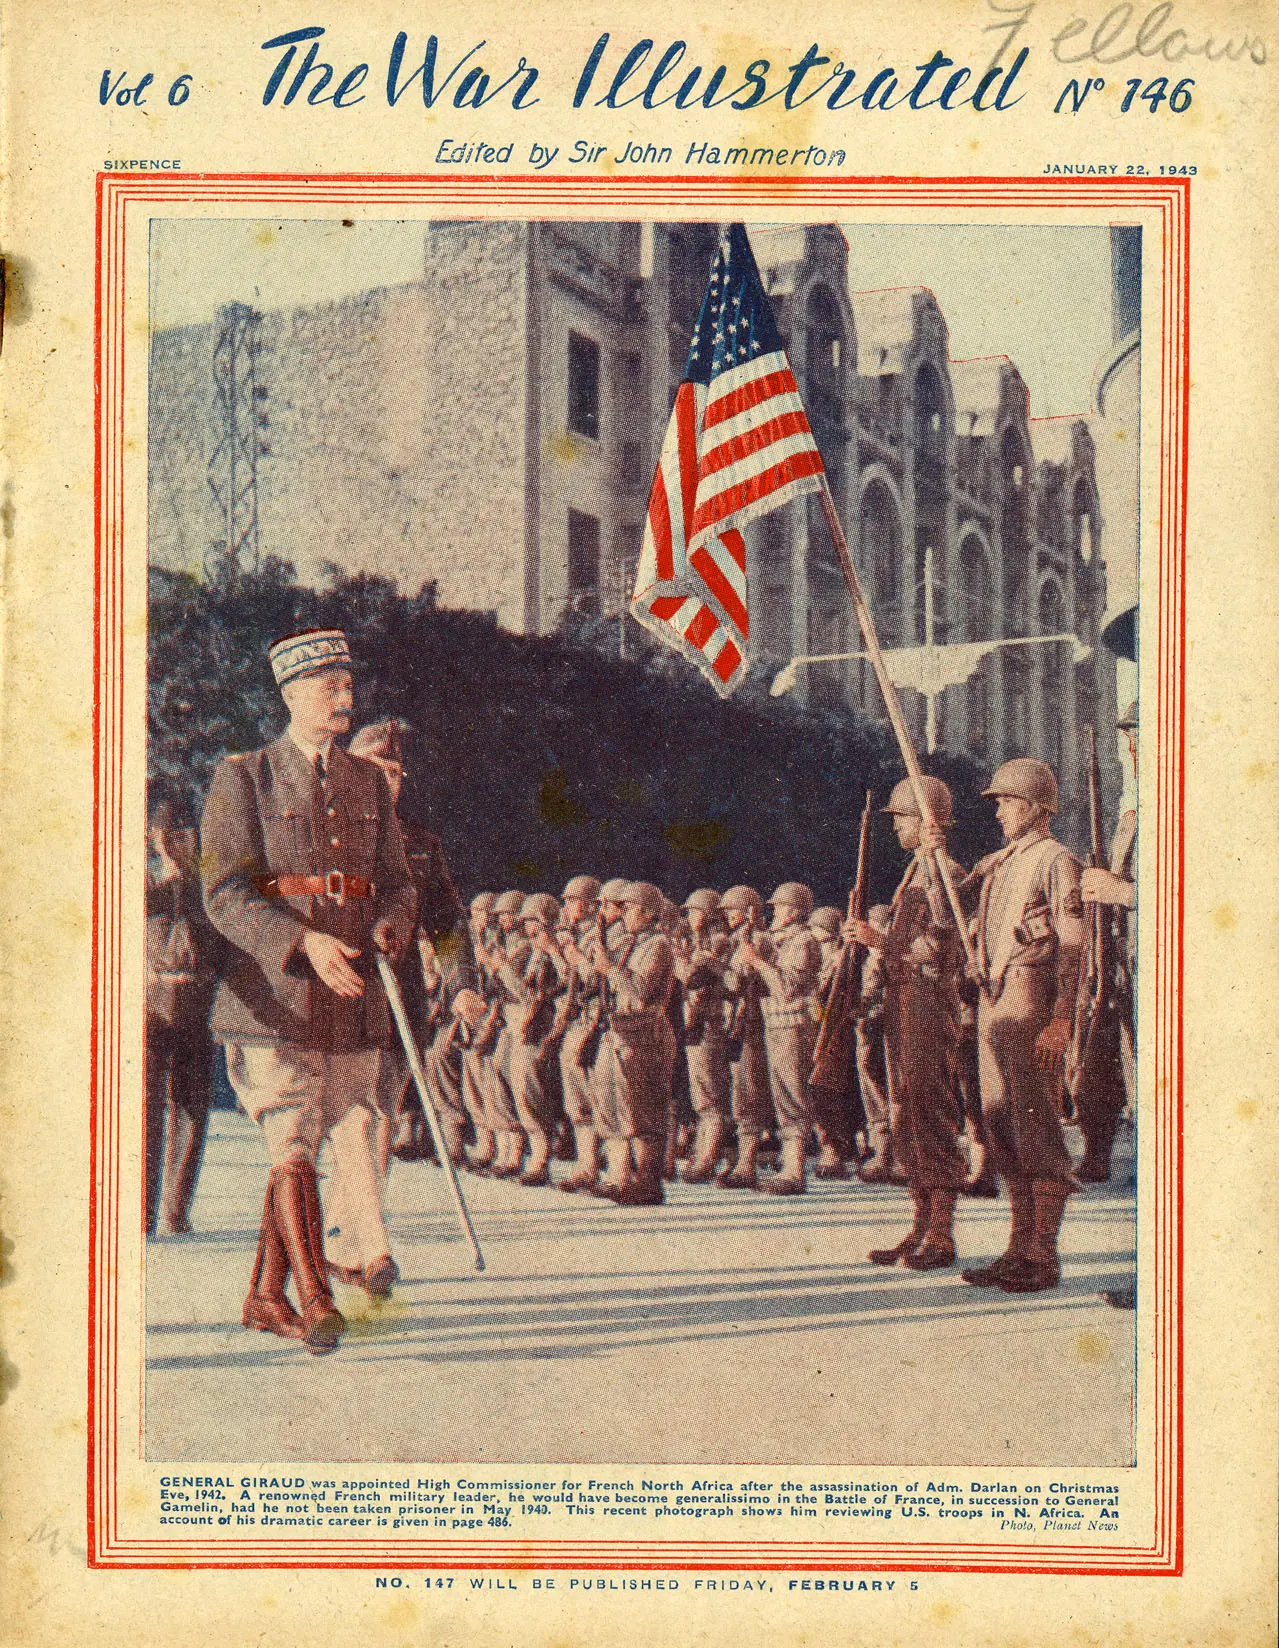 A page of The War Illustrated showing a French general marching past American soldiers at attention. The general is conducting an inspection and the American flag is being presented by a color guard.